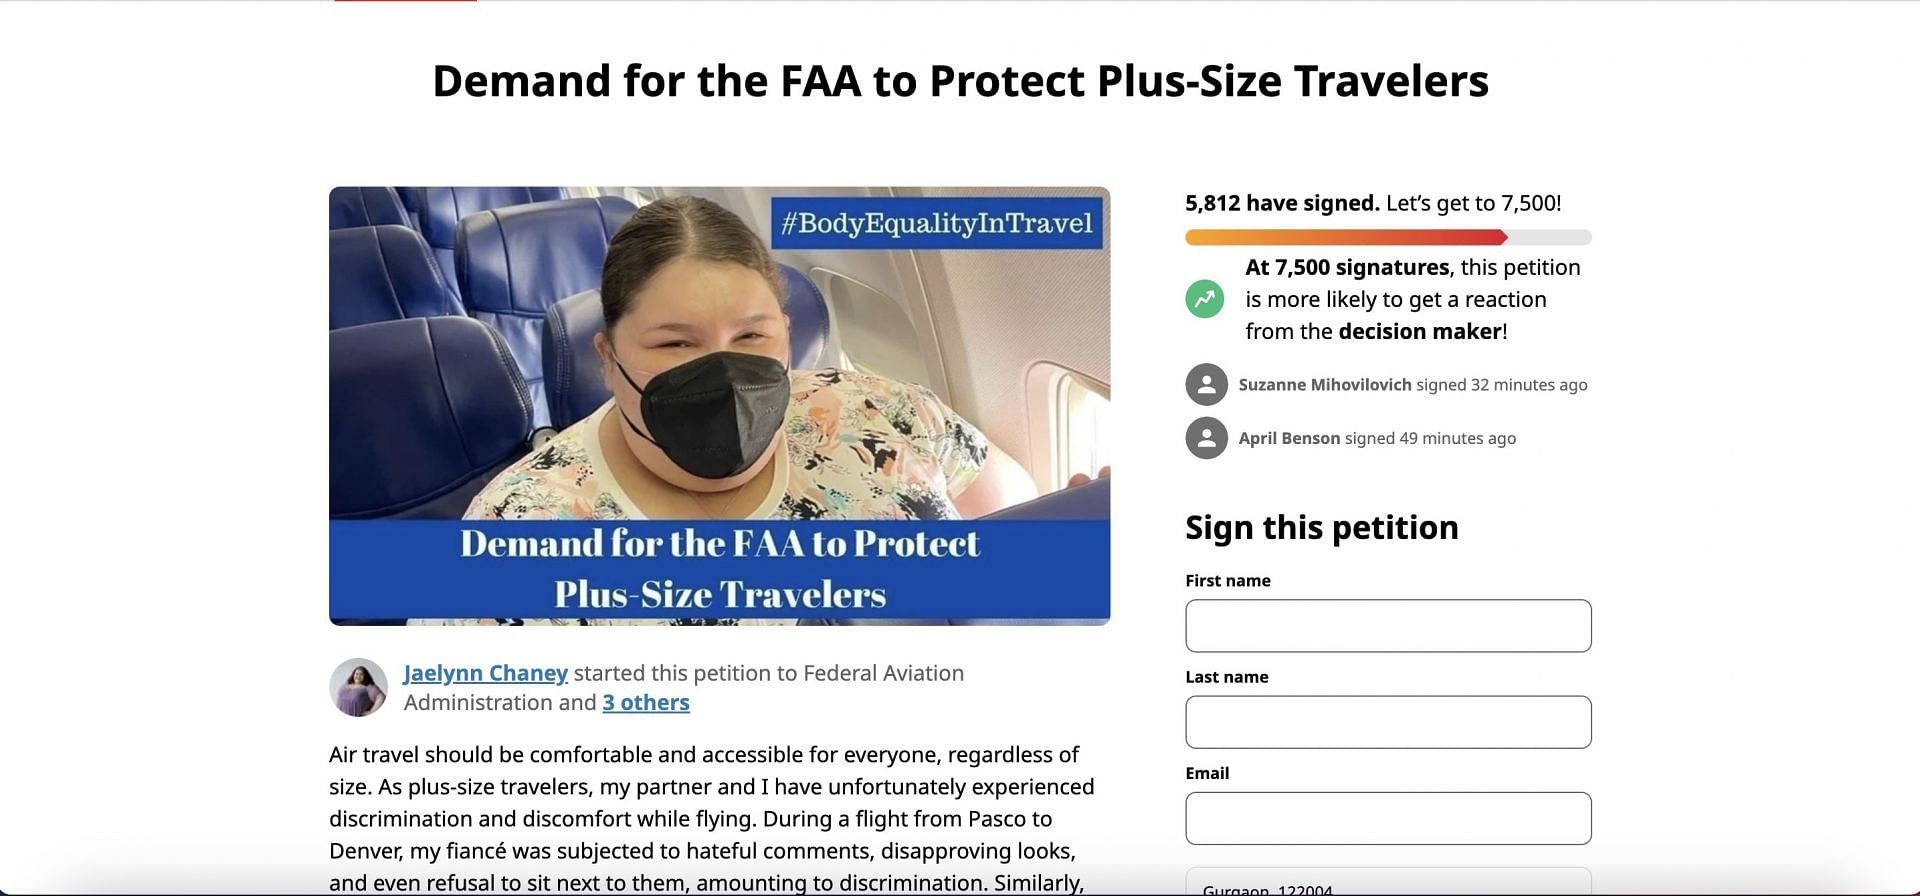 Jaelynn Chaney started a petition advocating for plus-sized travellers so that they can travel with better ease and comfort. (Image via change.org)